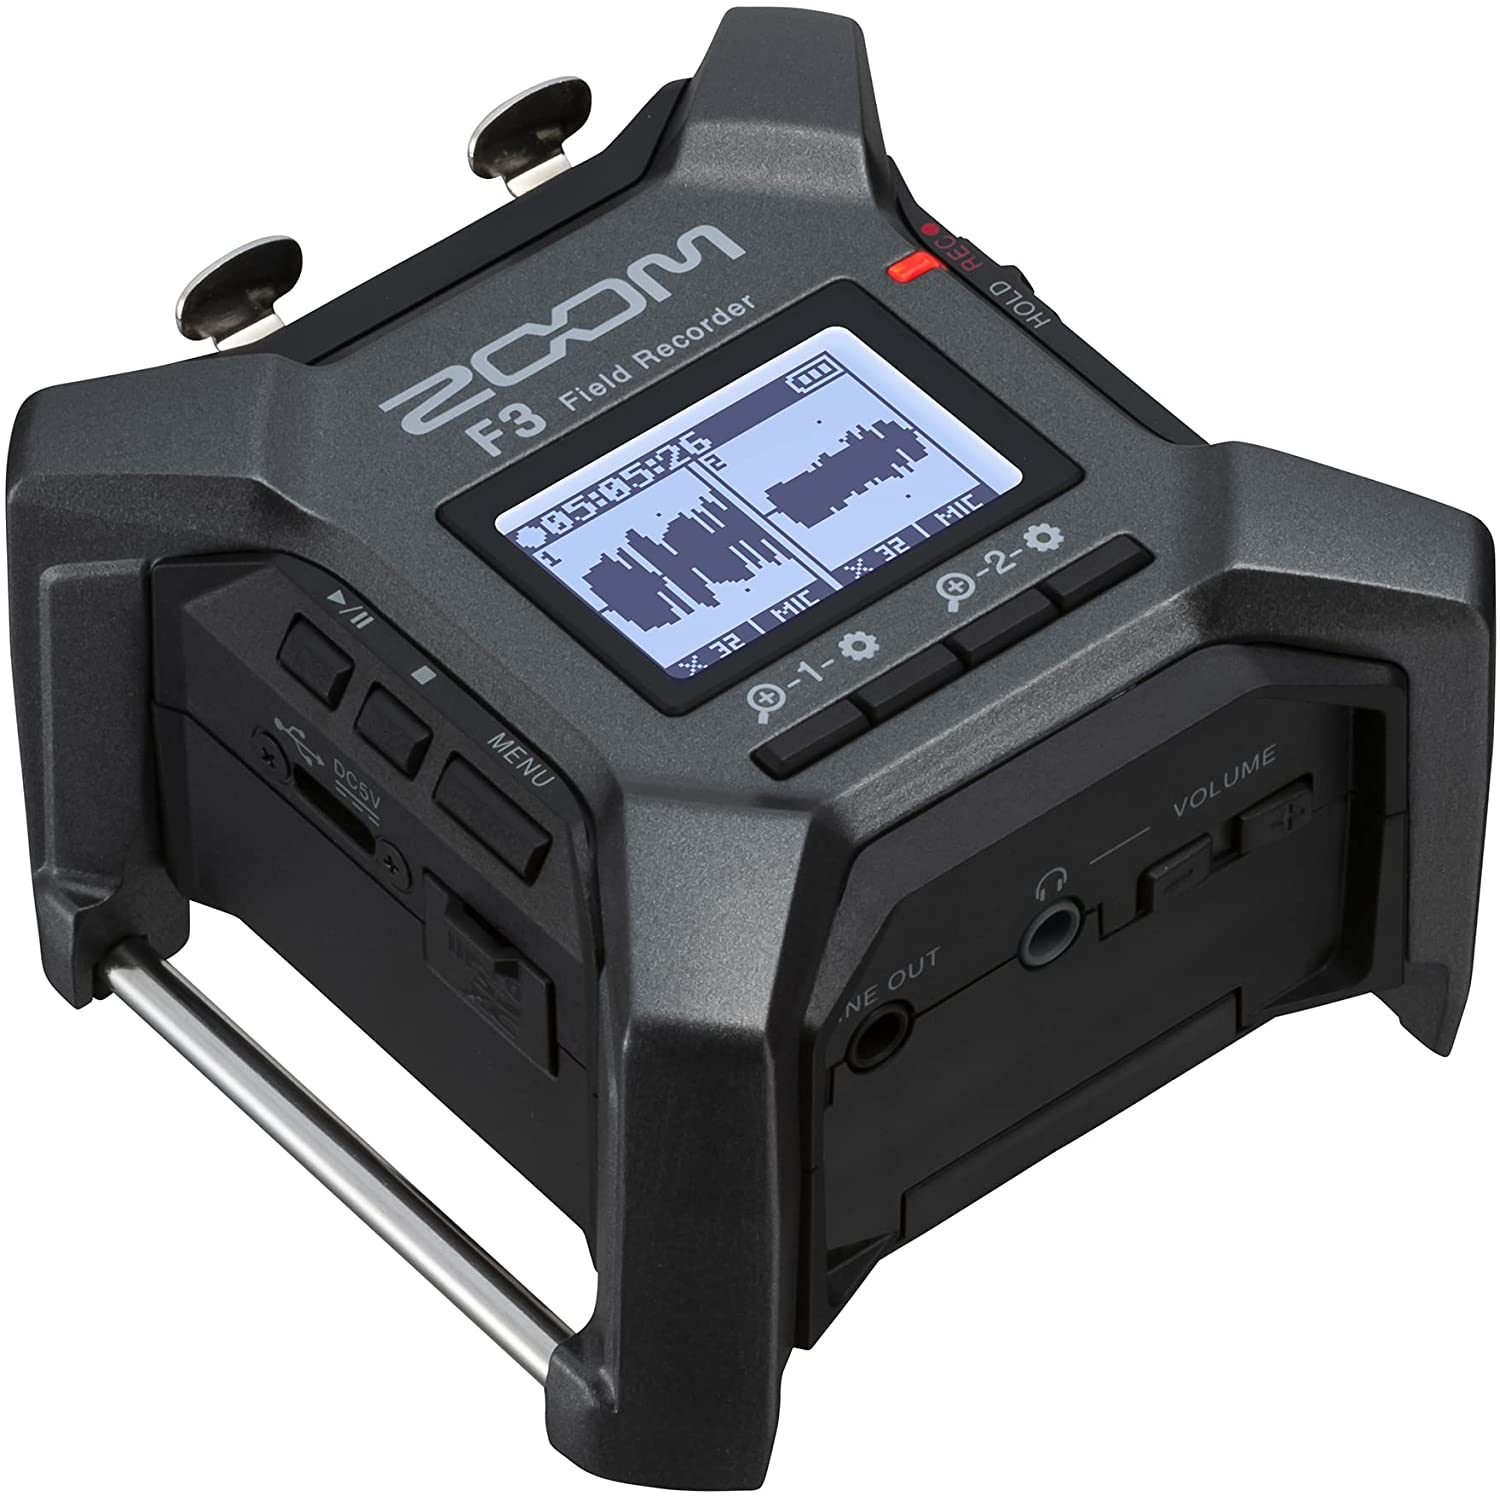 First look: Zoom F3 2-track 32-bit float recorder with 48 kHz sampling rate 28